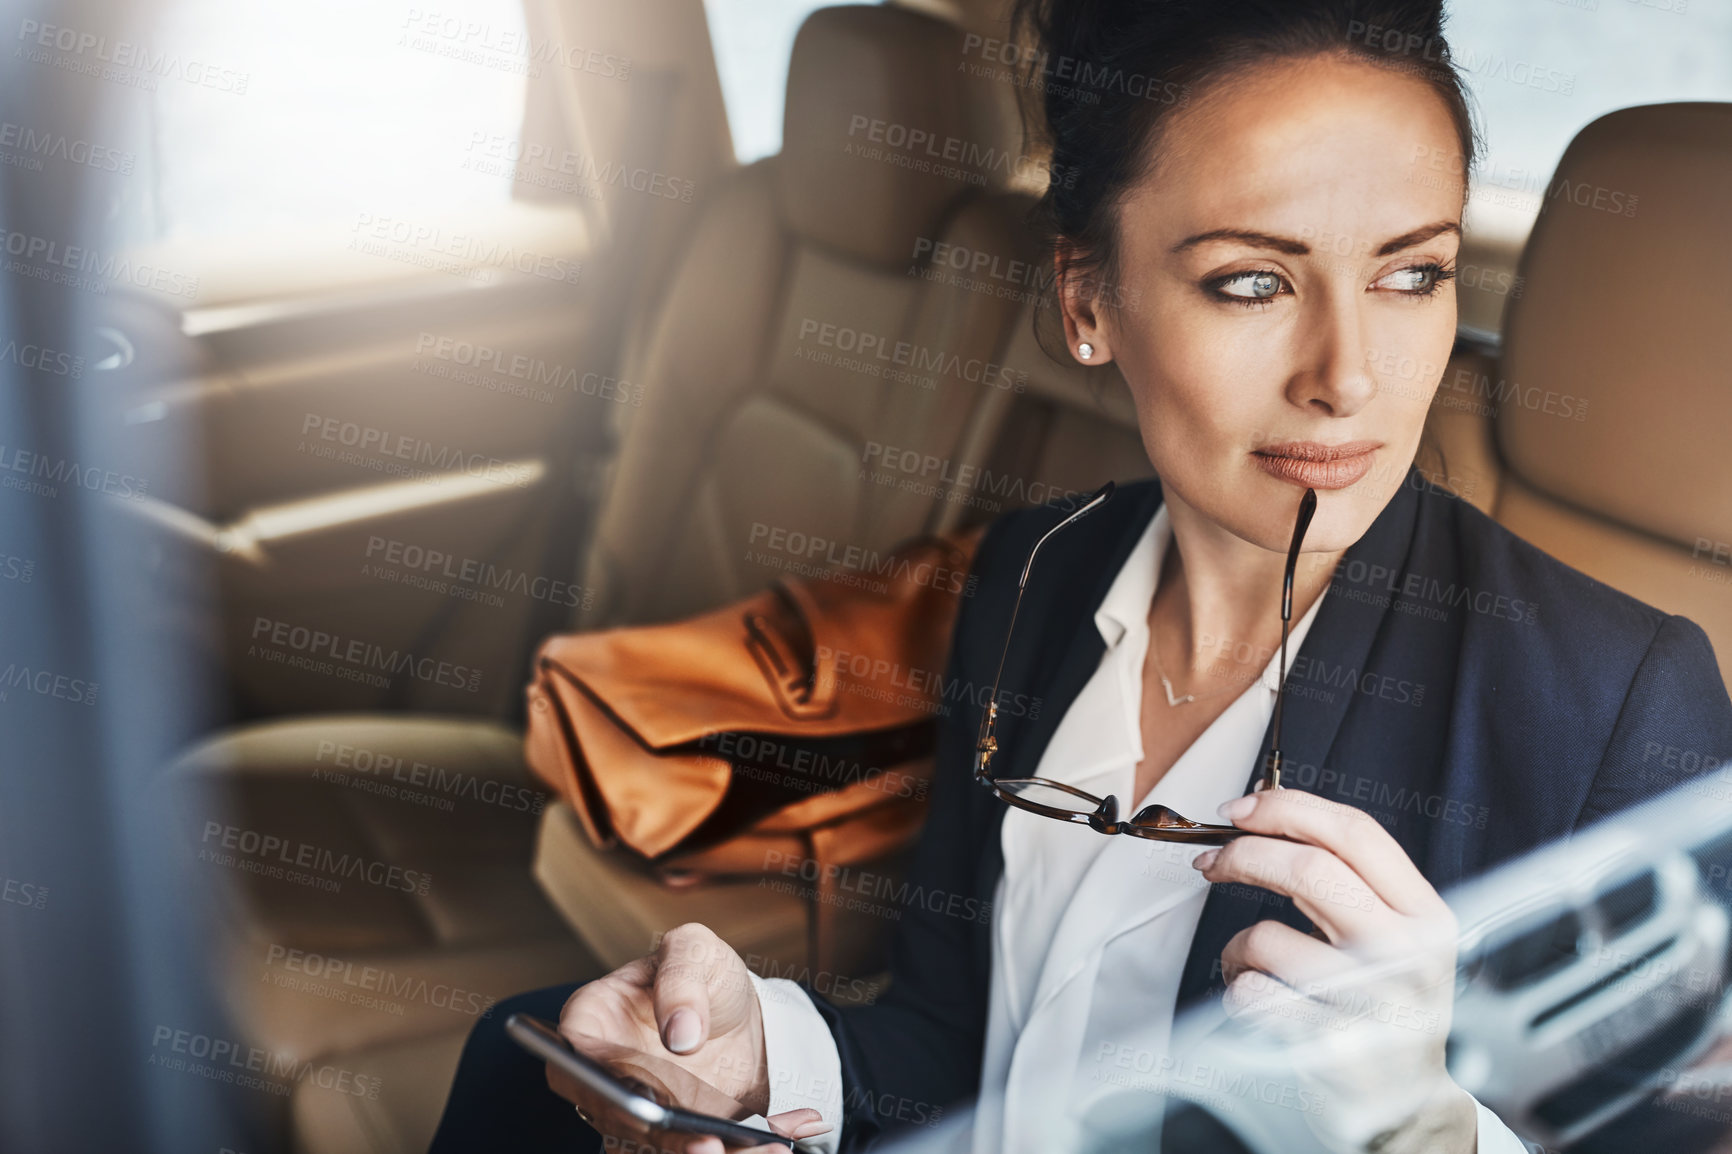 Buy stock photo Shot of a confident young businesswoman seated in a car as a passenger while busy on her phone and looking out of the window